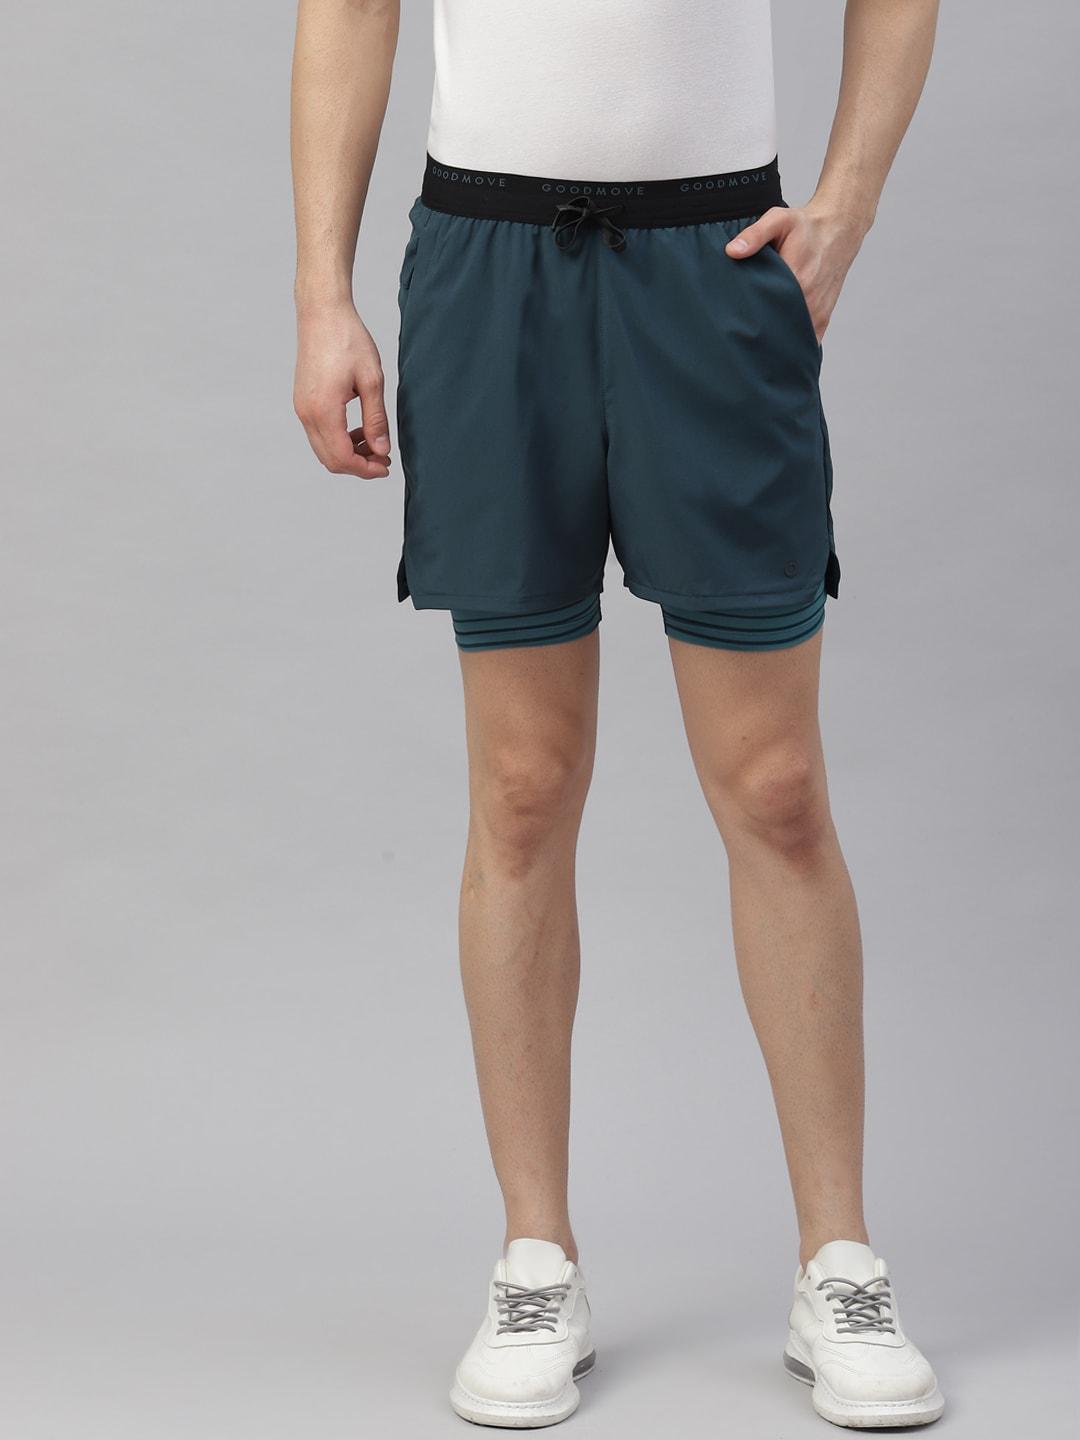 marks-&-spencer-men-teal-green-solid-layered-sports-shorts